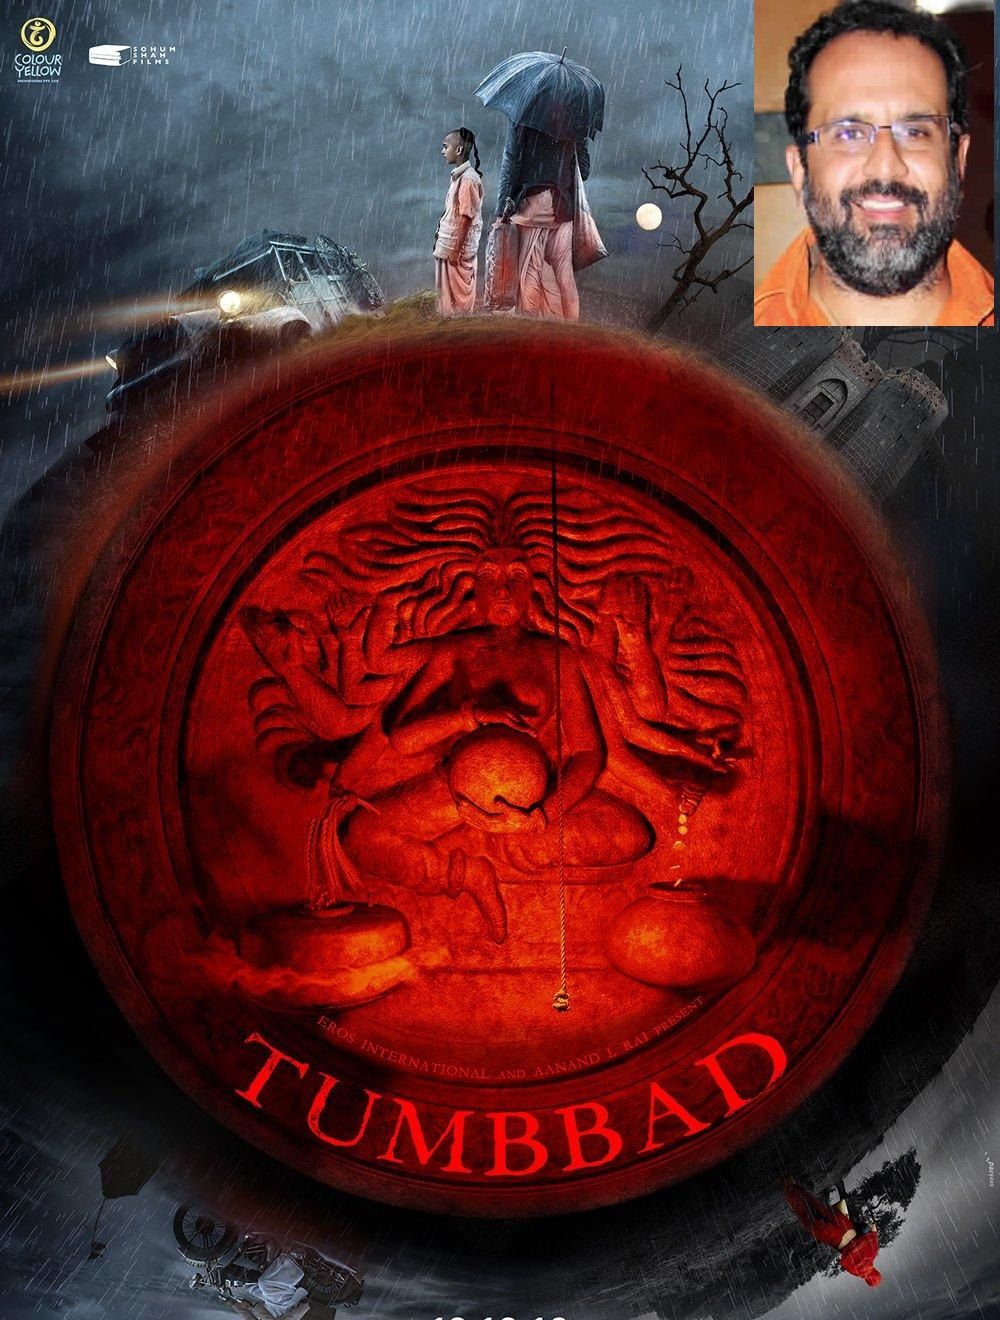 Tumbbad Is A Theatrical Experience One Shouldn't Miss: Anand L Rai